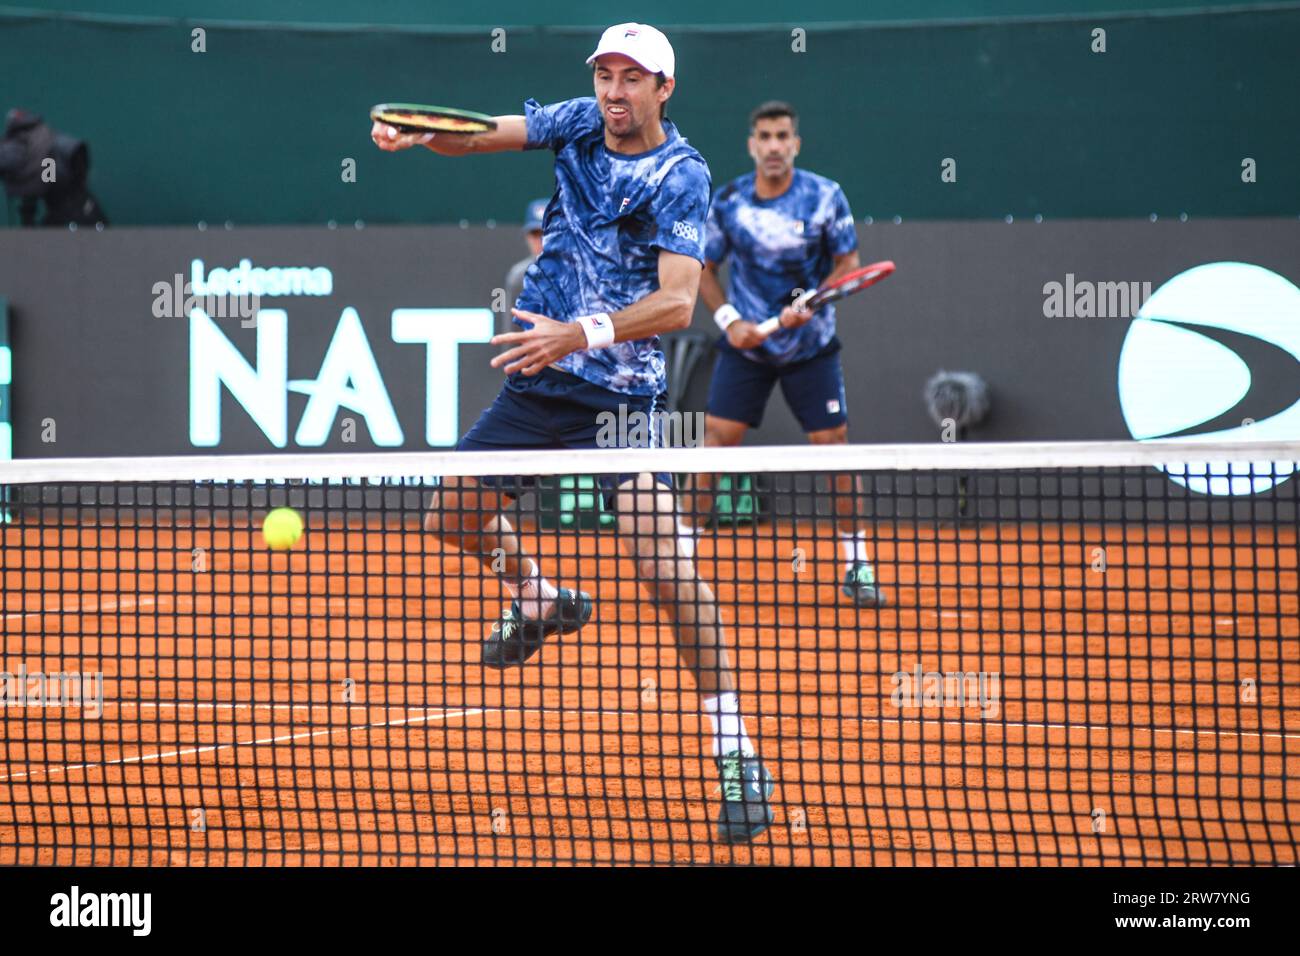 Andres Molteni, Maximiliano Gonzalez (Argentina) against Lithuania,  doubles match. Davis Cup, Group Stage. Stock Photo